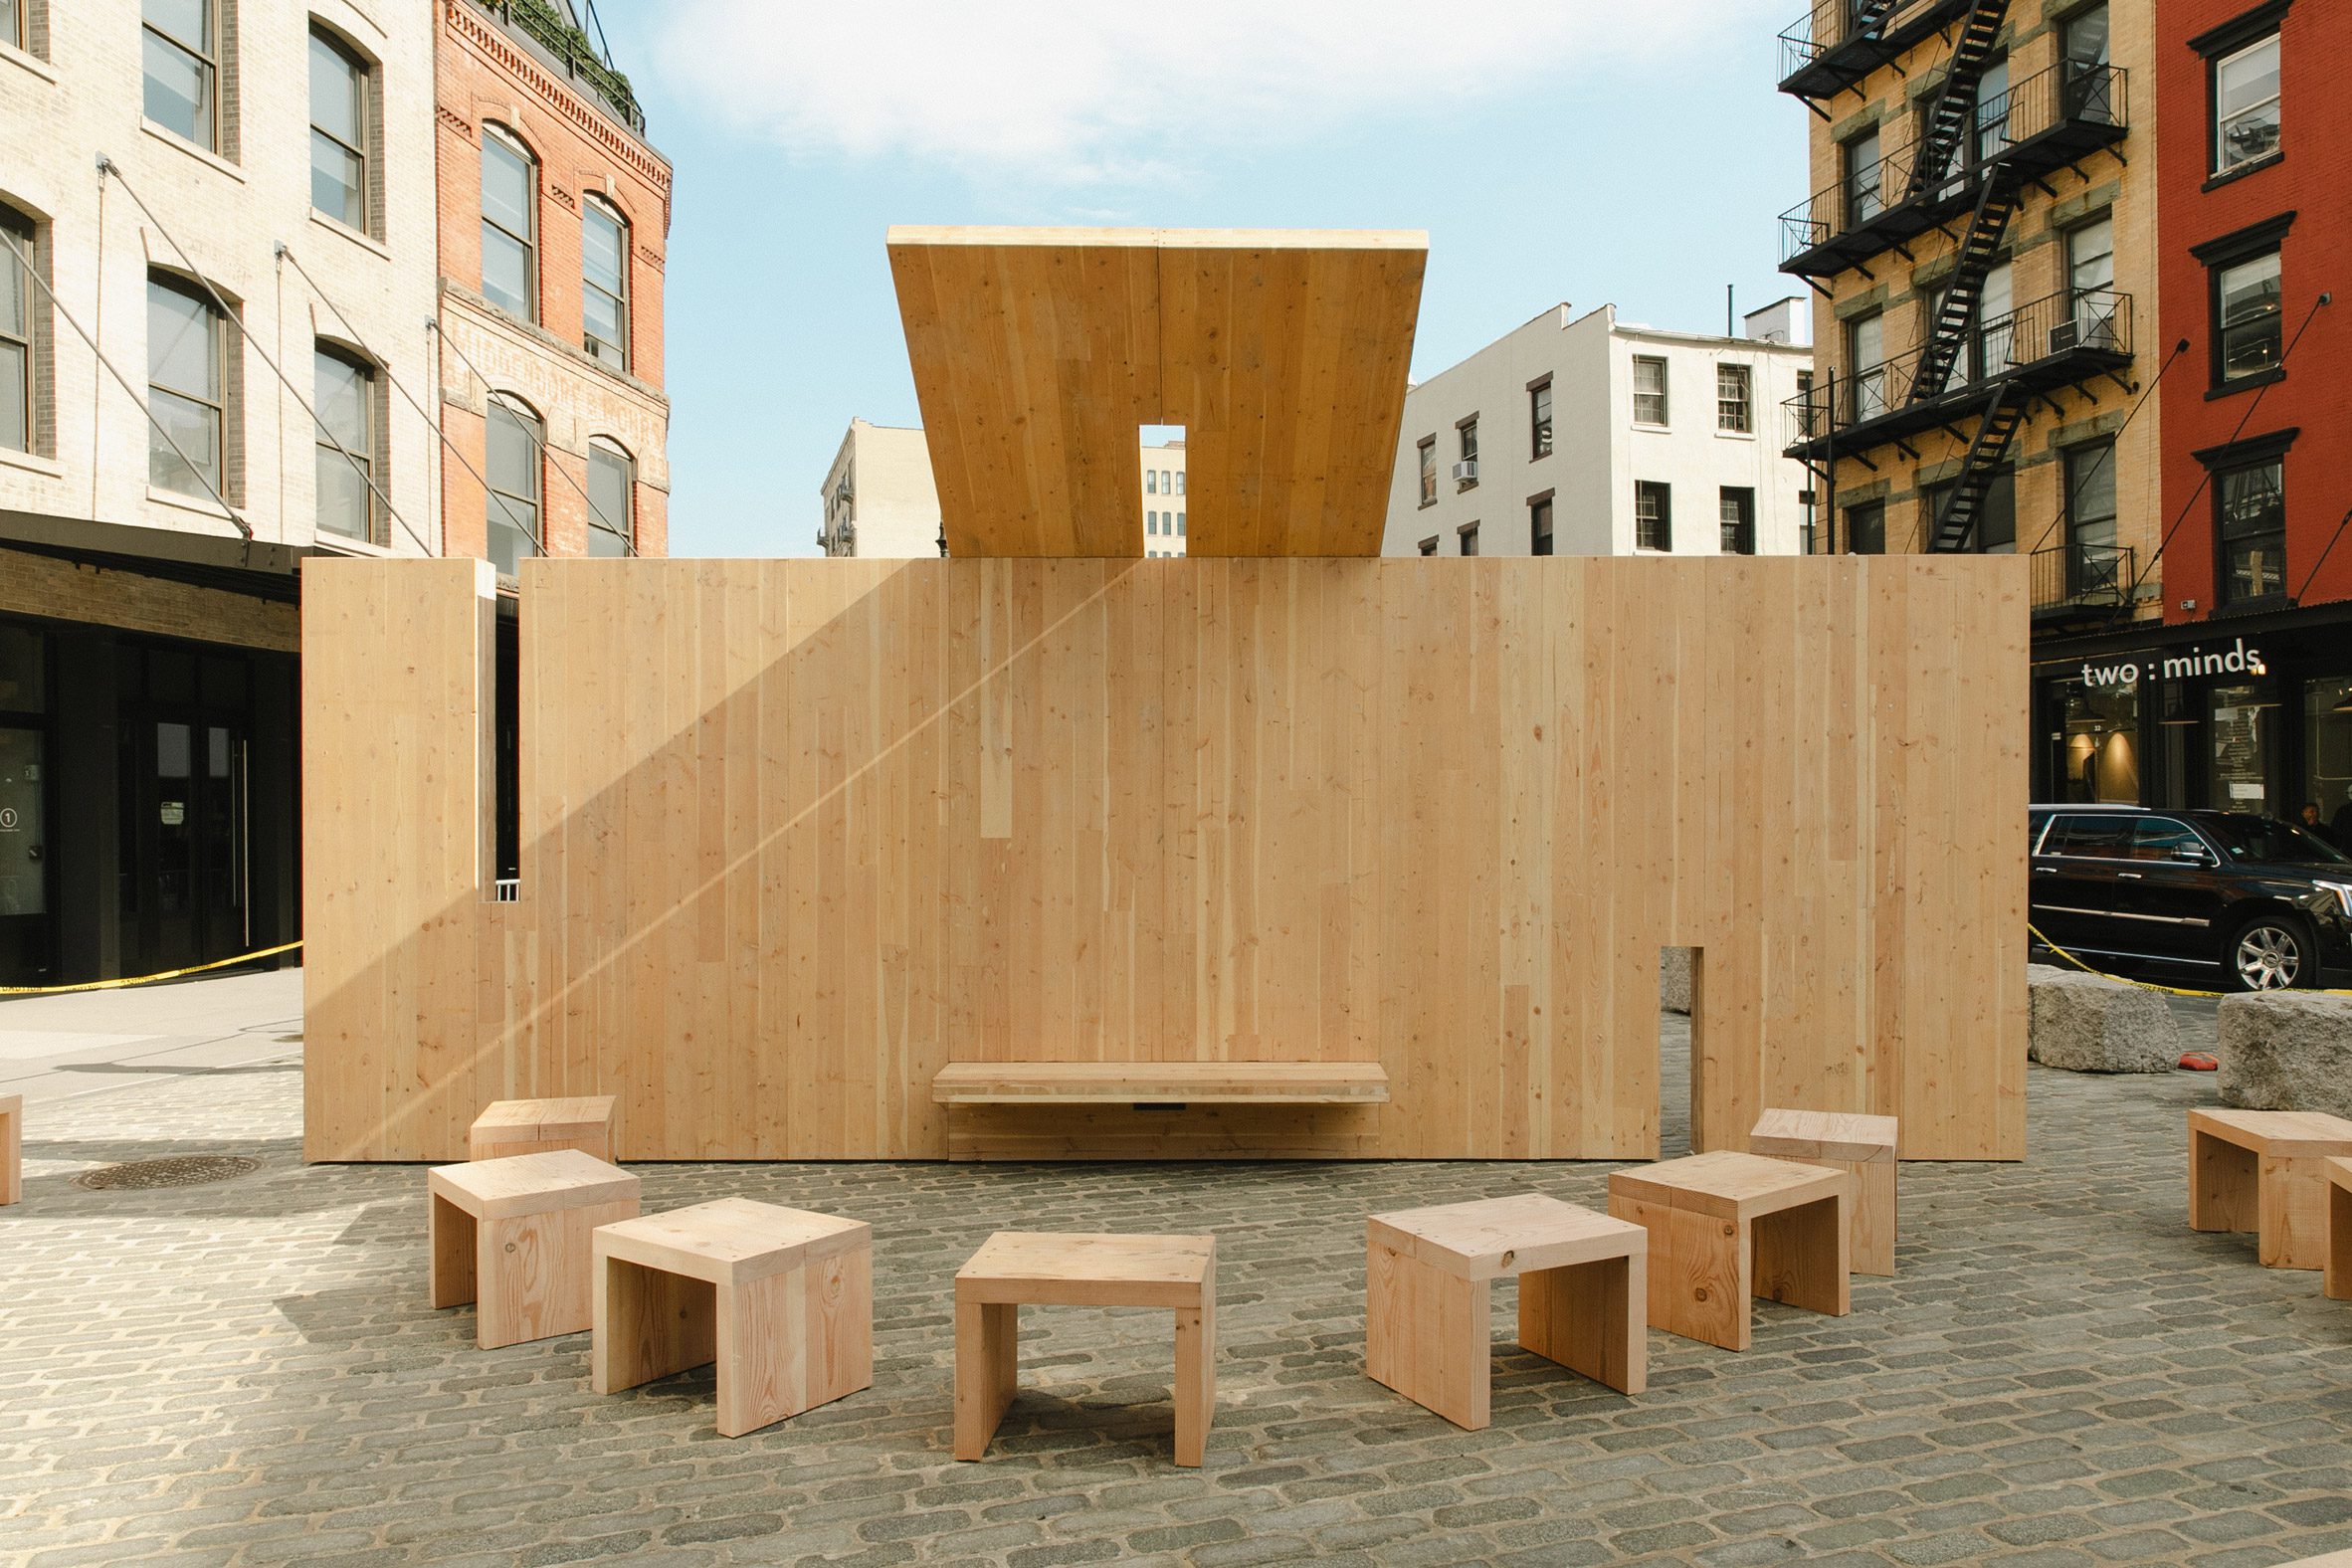 A pavilion made of CLT panels for Archtober